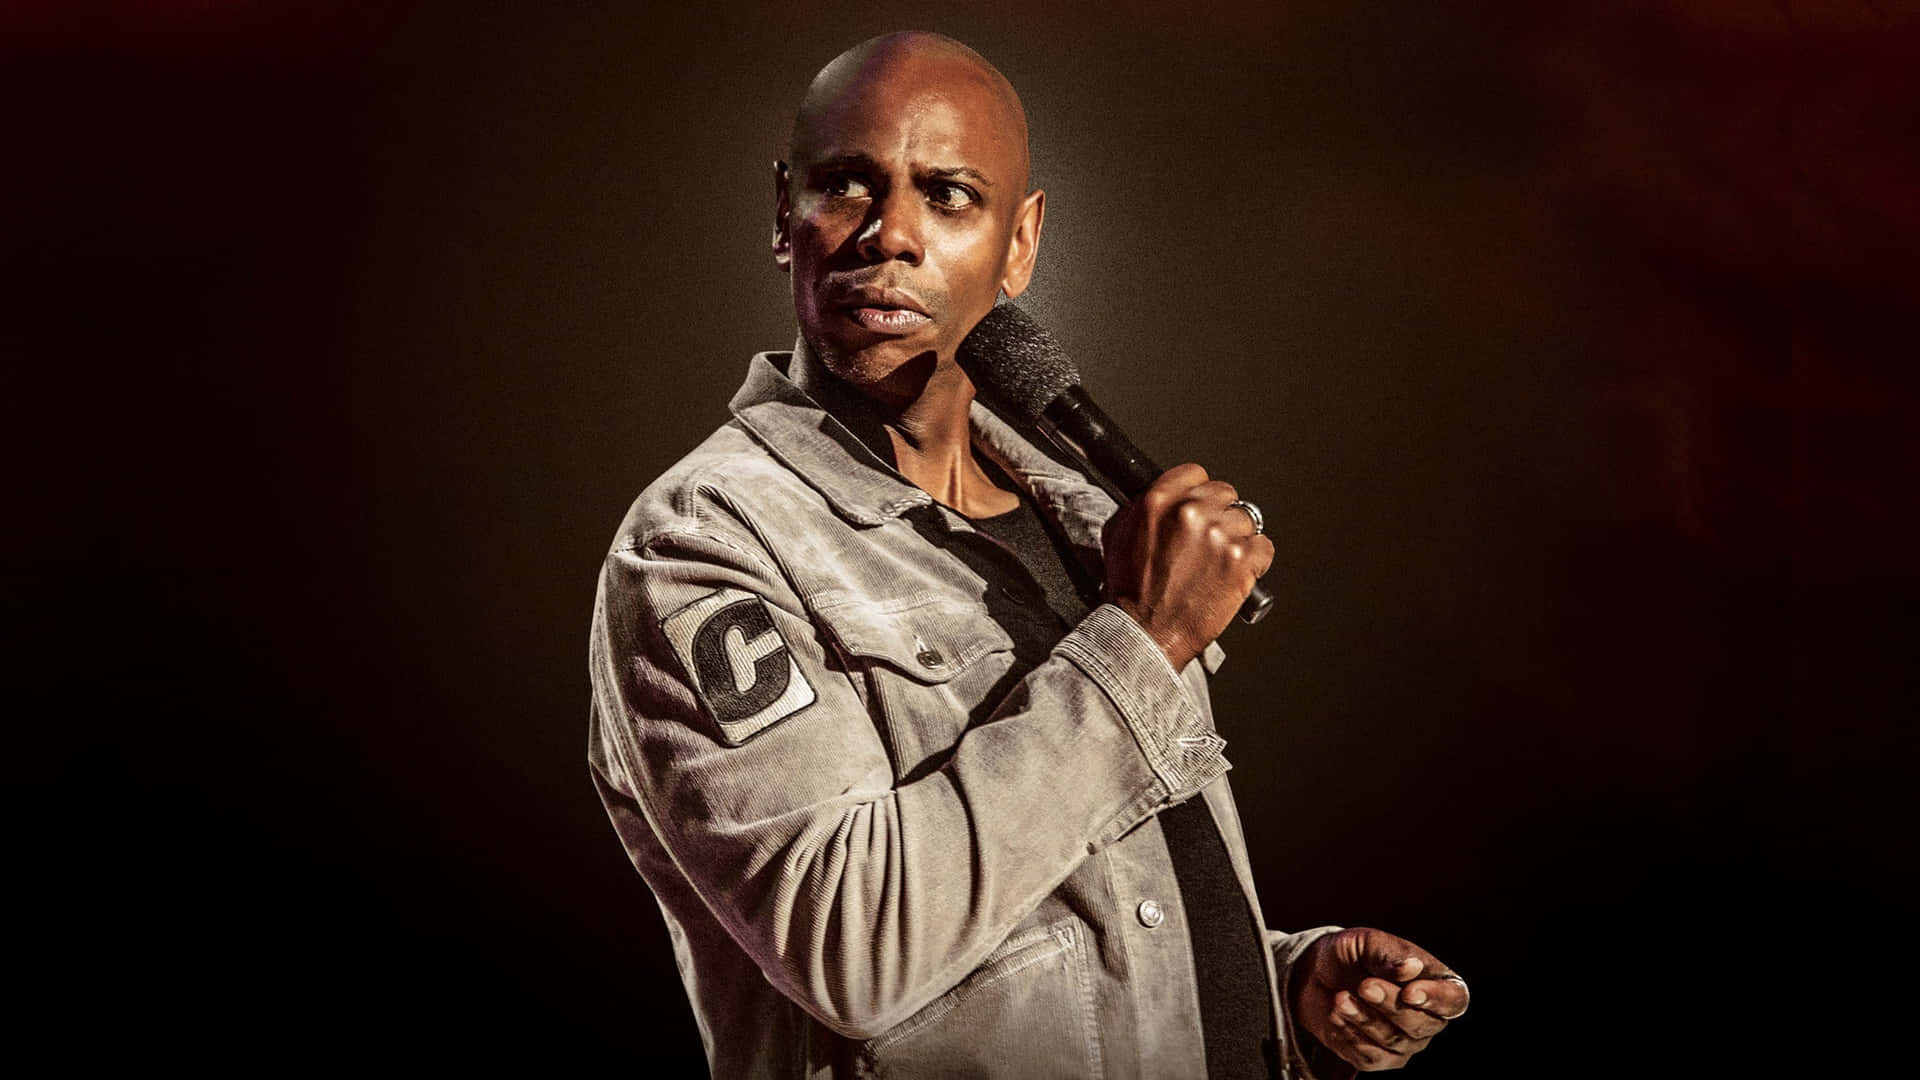 Comedian Dave Chappelle Performing On Stage